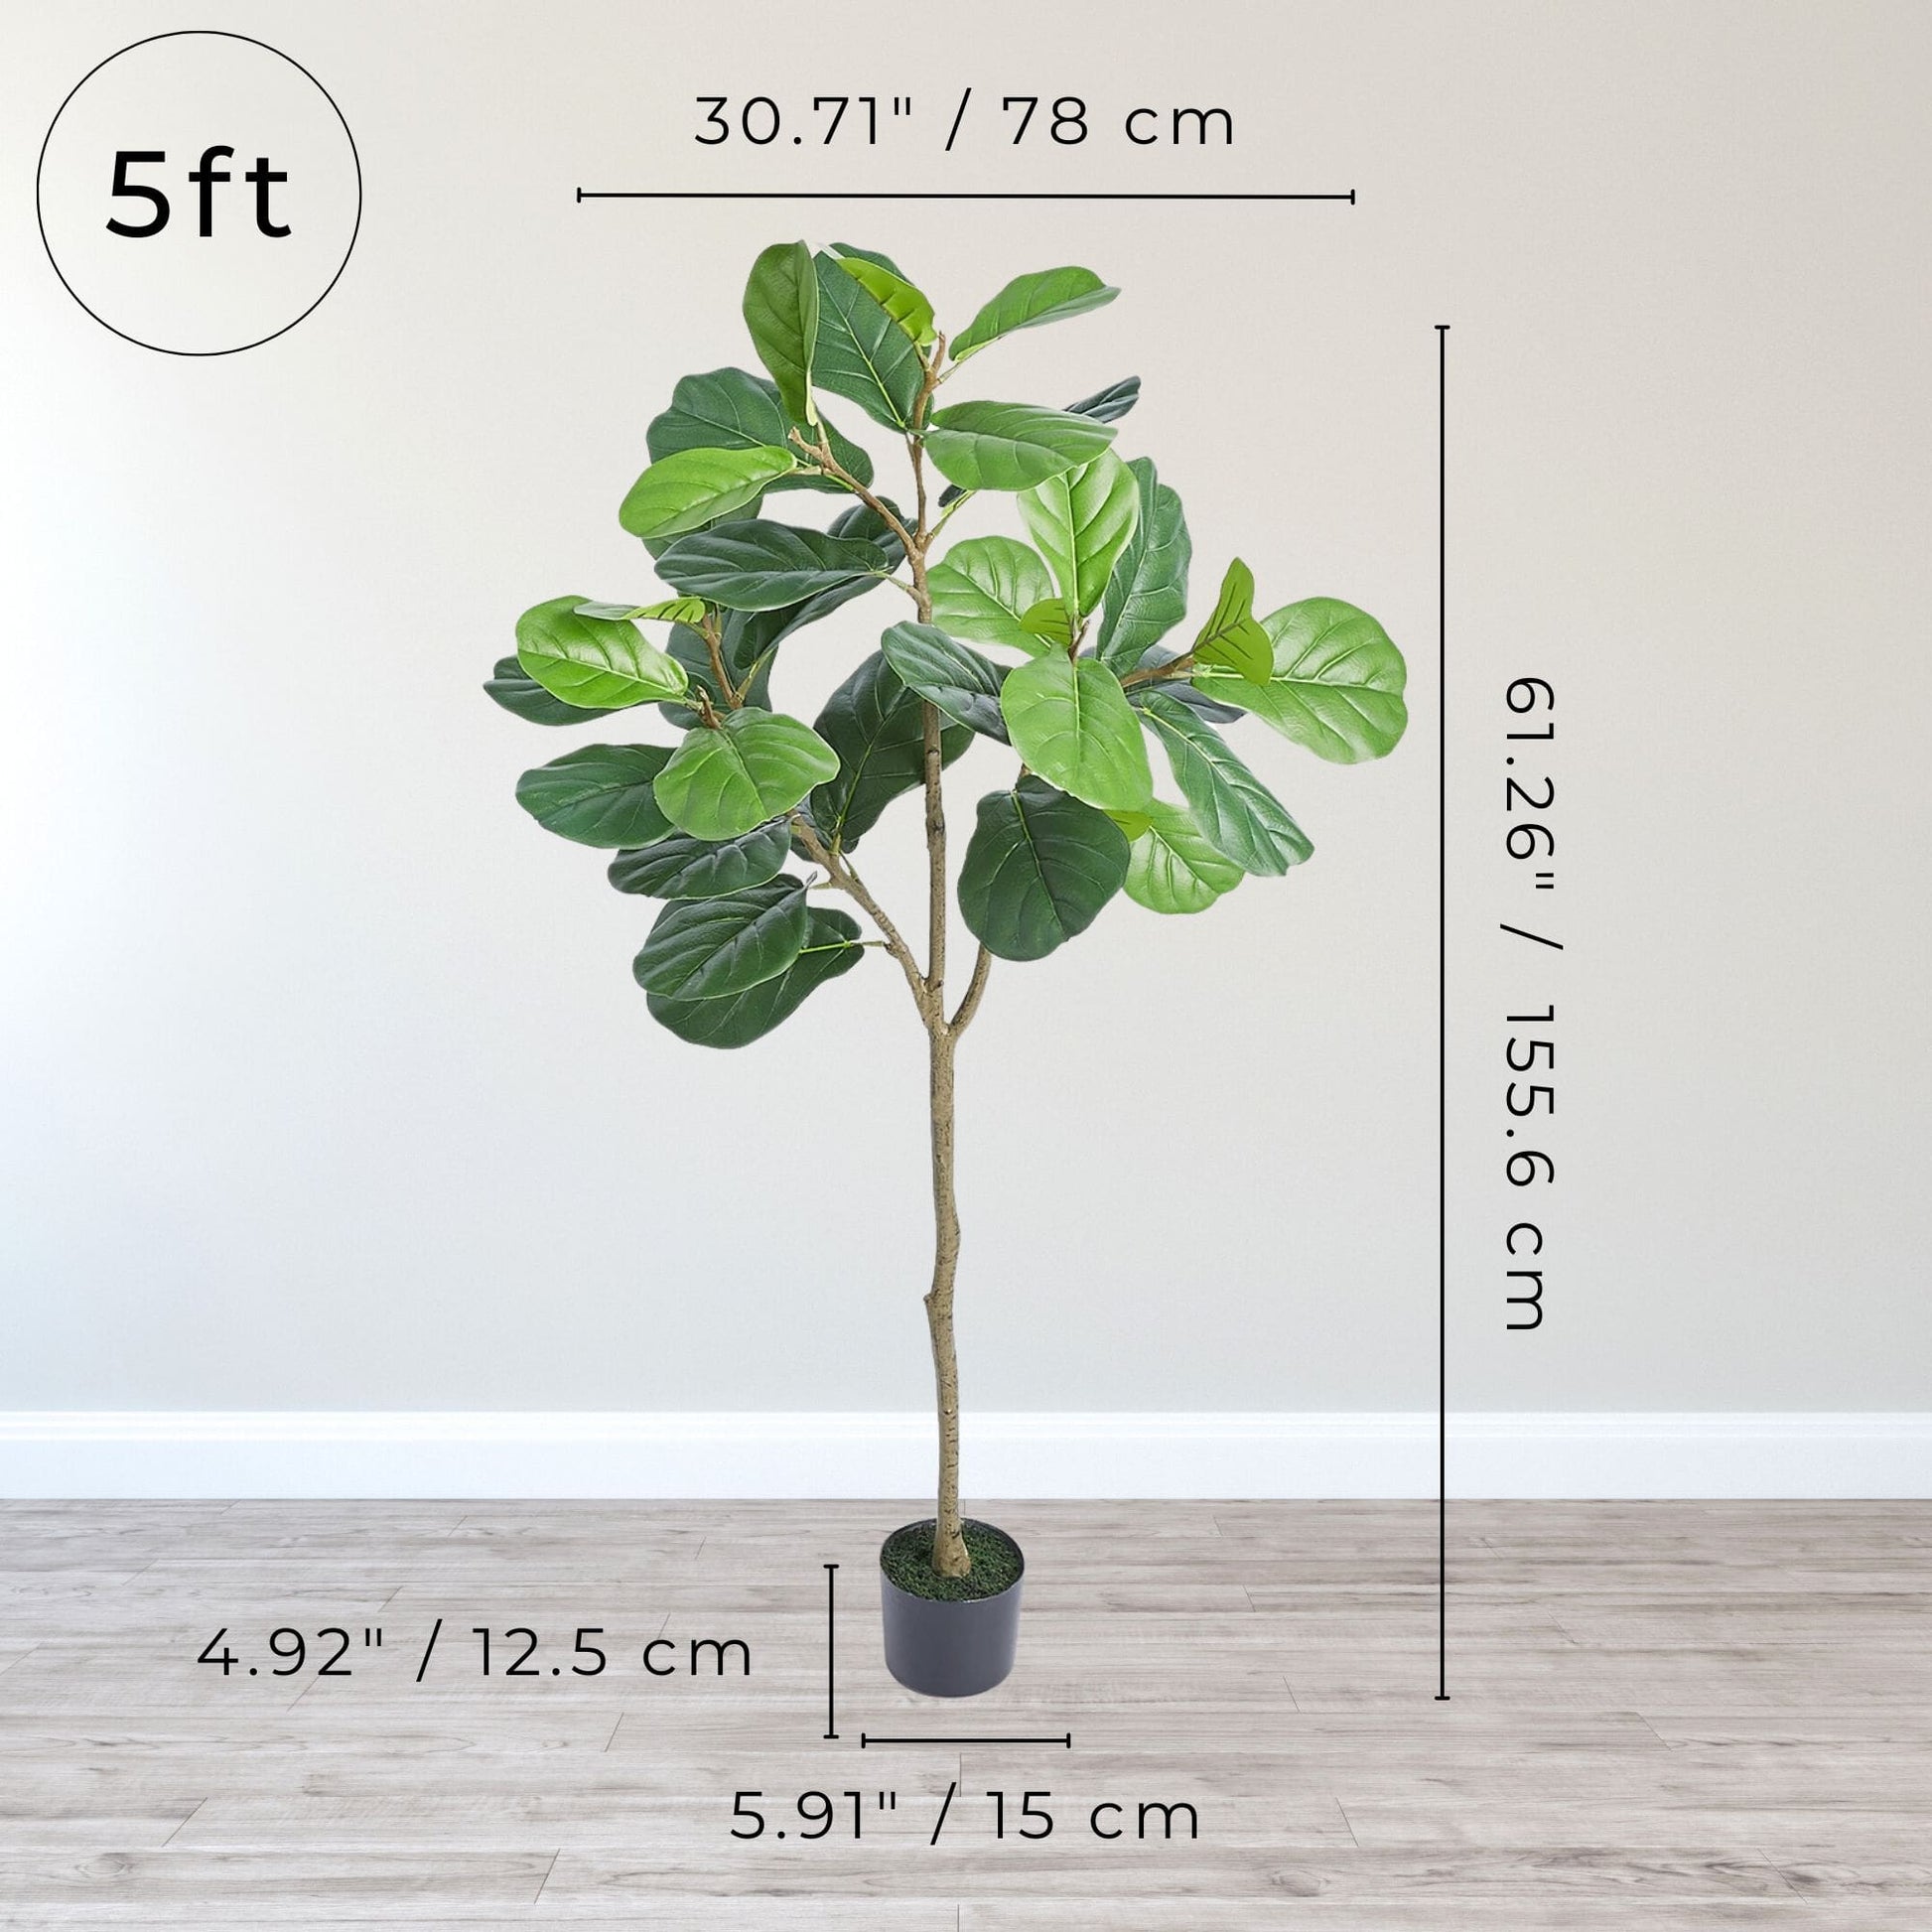 A 5ft artificial Fiddle Leaf Fig plant with accurate size representation for home decoration